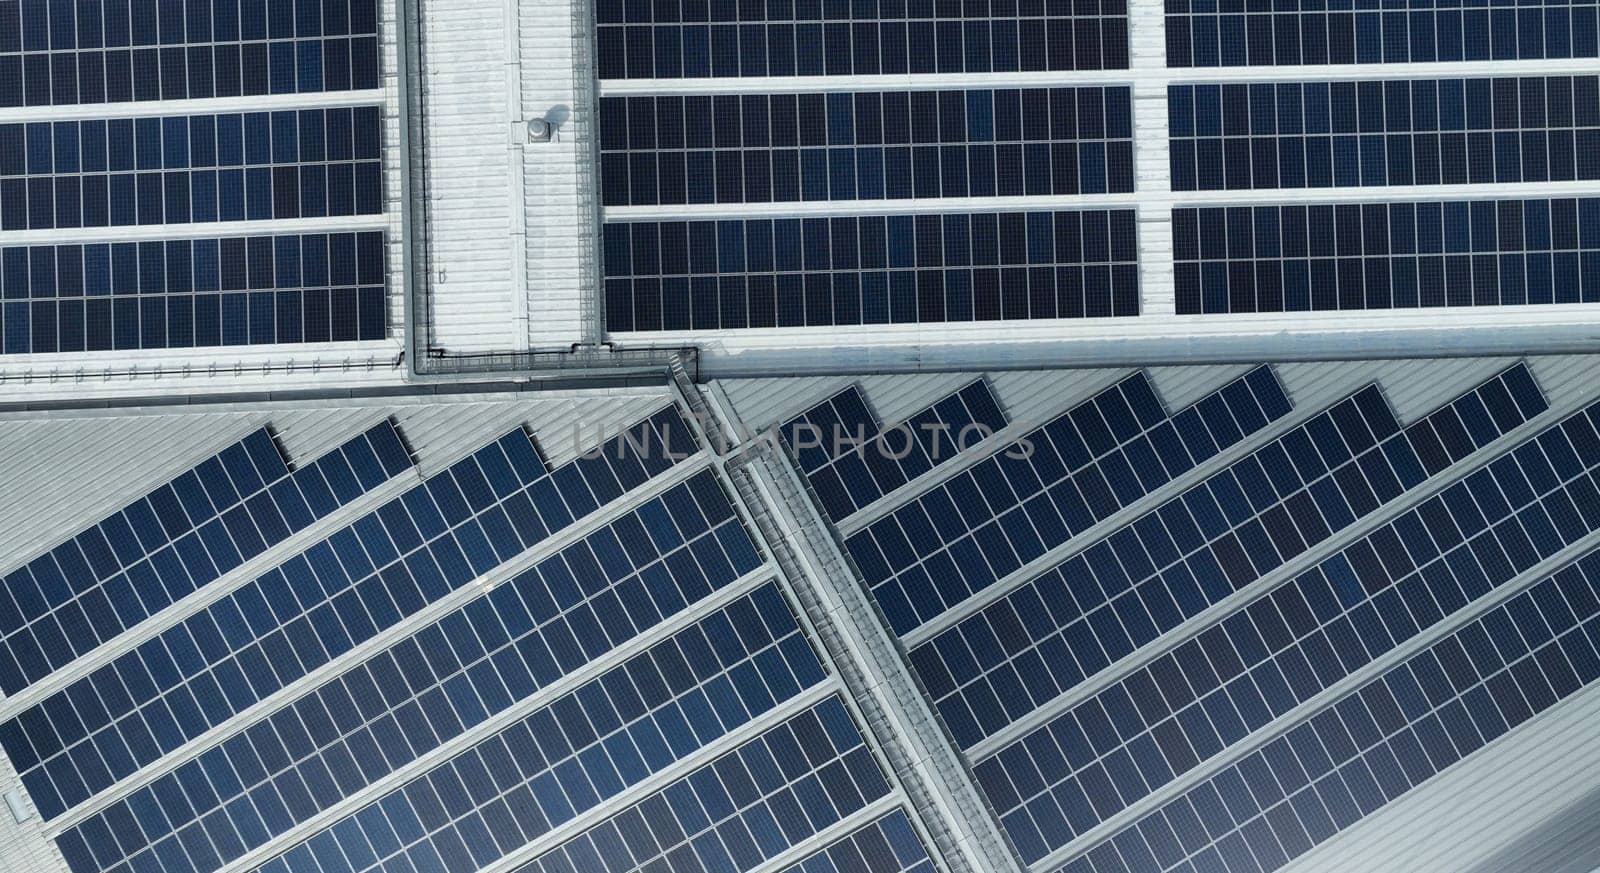 Aerial view of solar panels or photovoltaic module. Solar power for green energy. Sustainable resources. Solar cell panels use sun light as a source to generate electricity. Photovoltaics or PV. by Fahroni